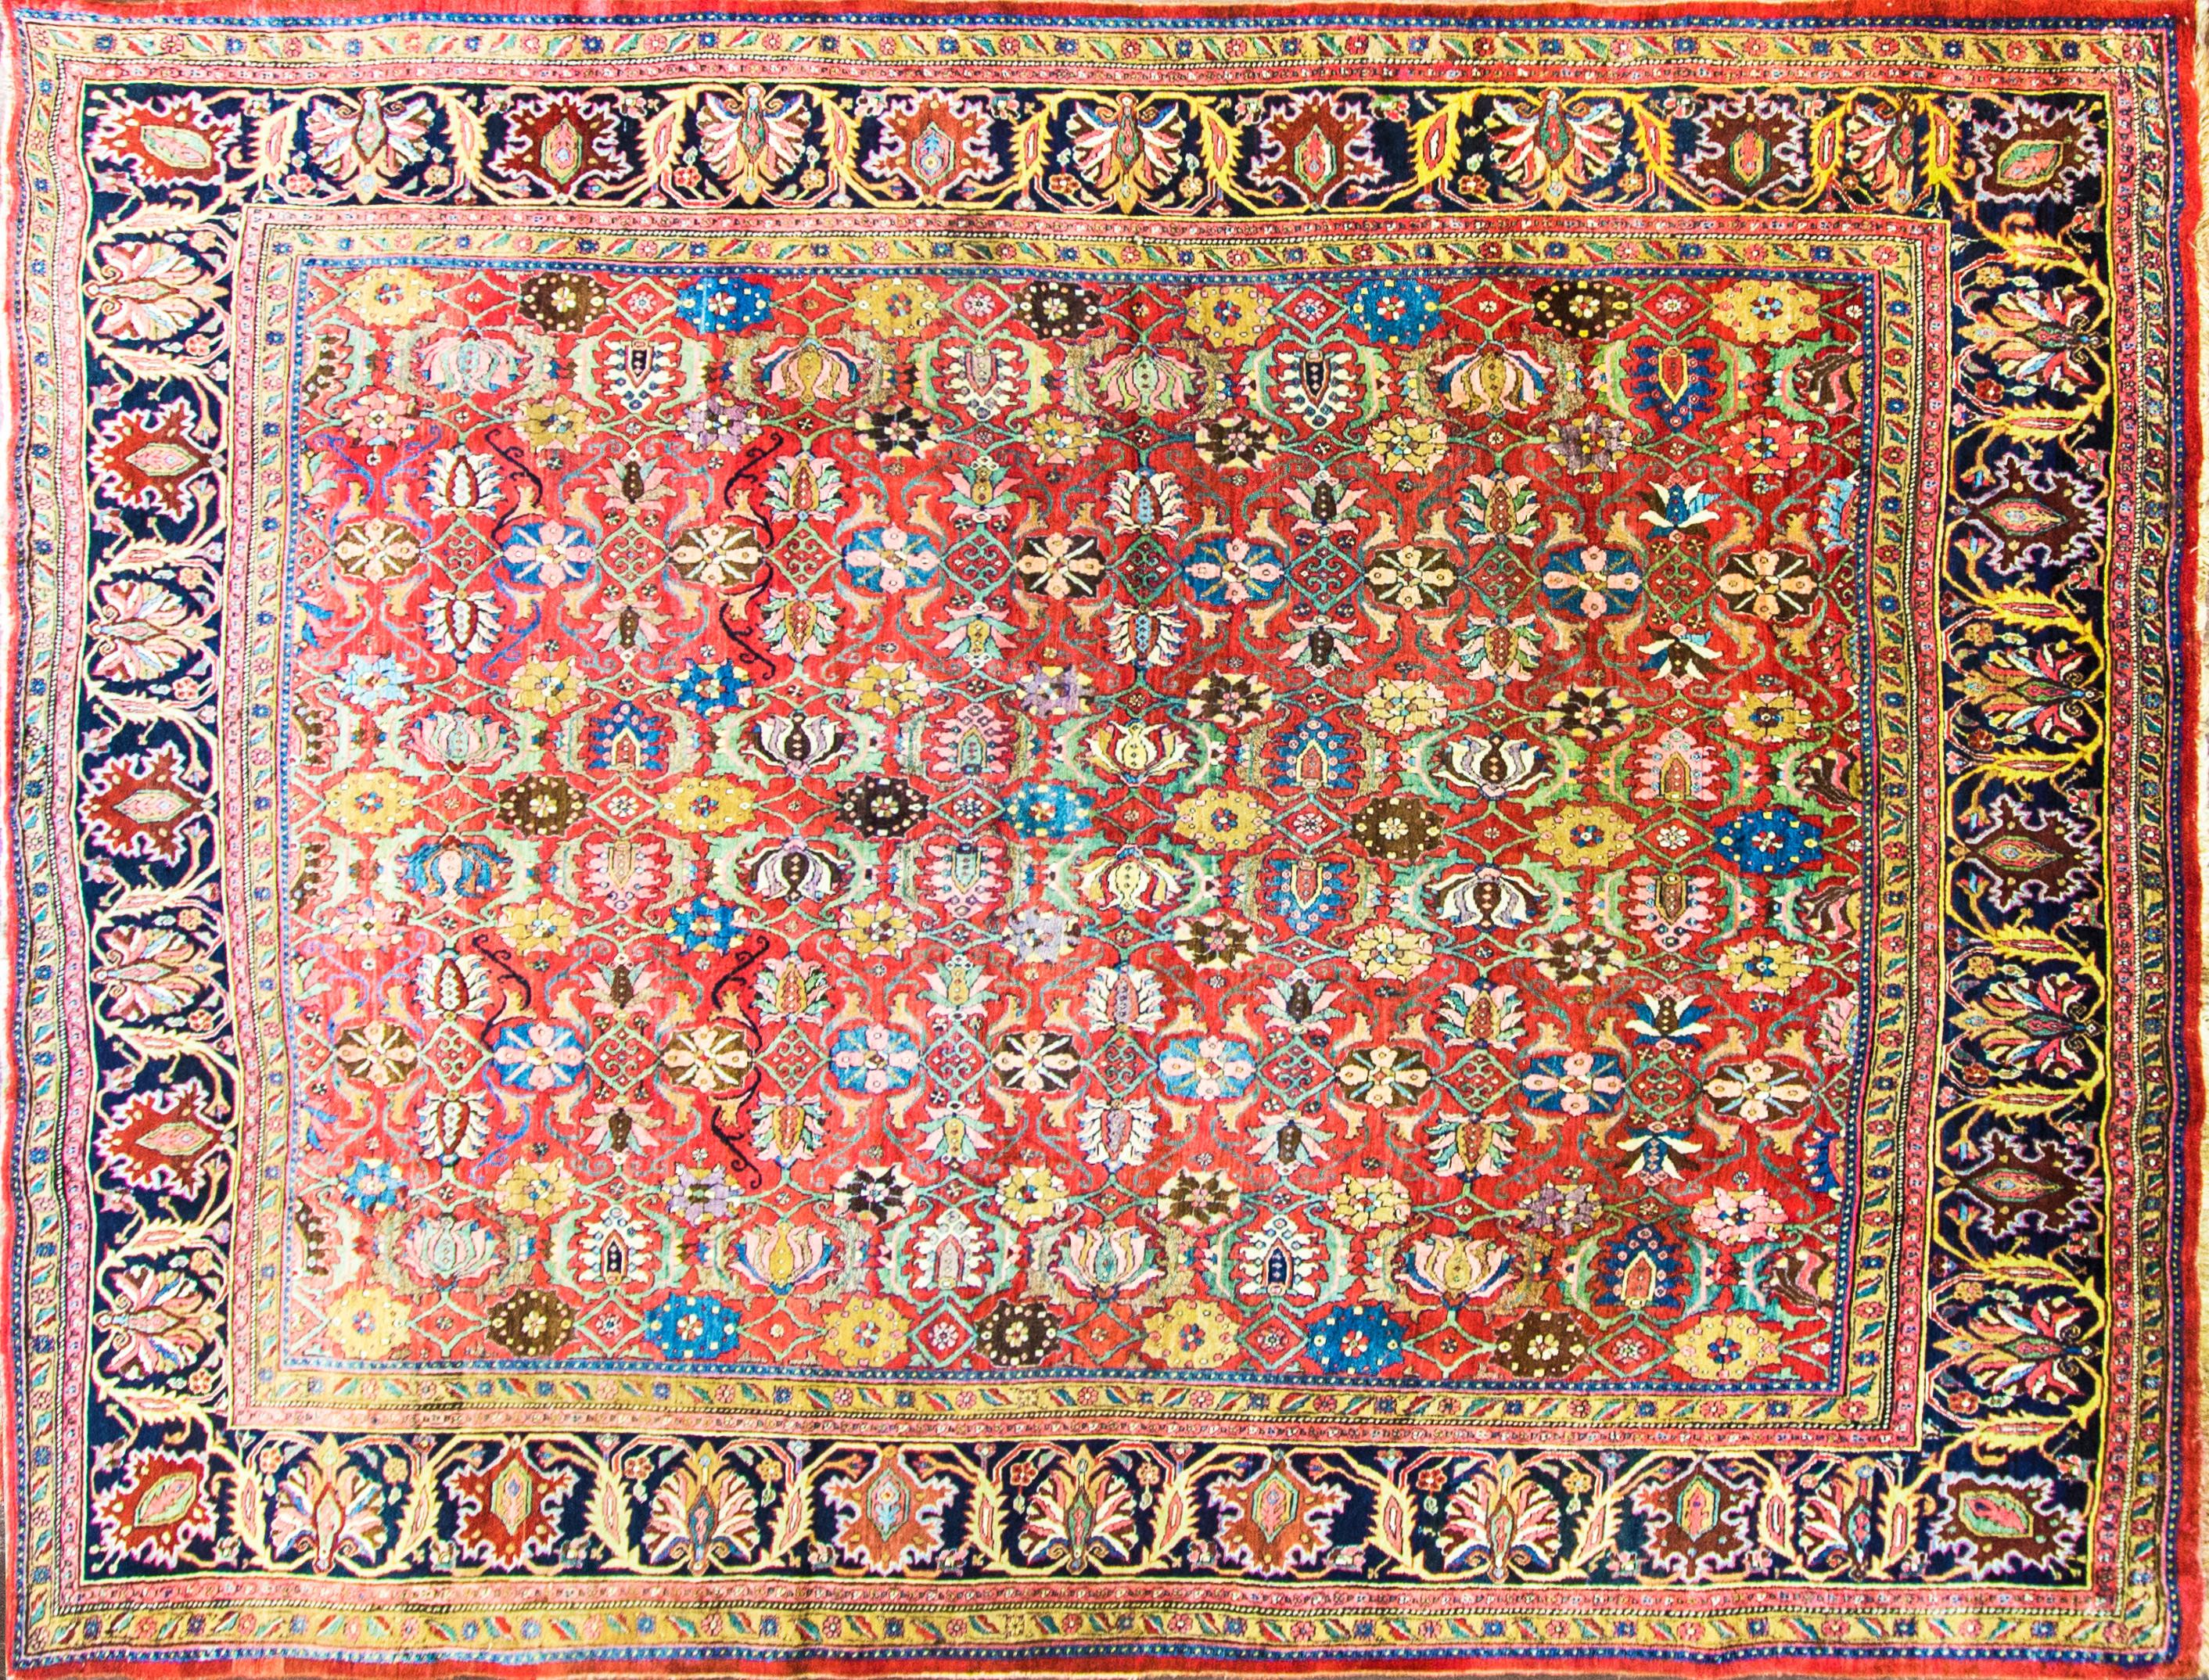 The description you provided details an impressive and collectible antique Persian Bijar Halwai carpet. Here's a summary of the key features and characteristics mentioned:

Size: The carpet measures 9 feet 2 inches in width by 12 feet 10 inches in